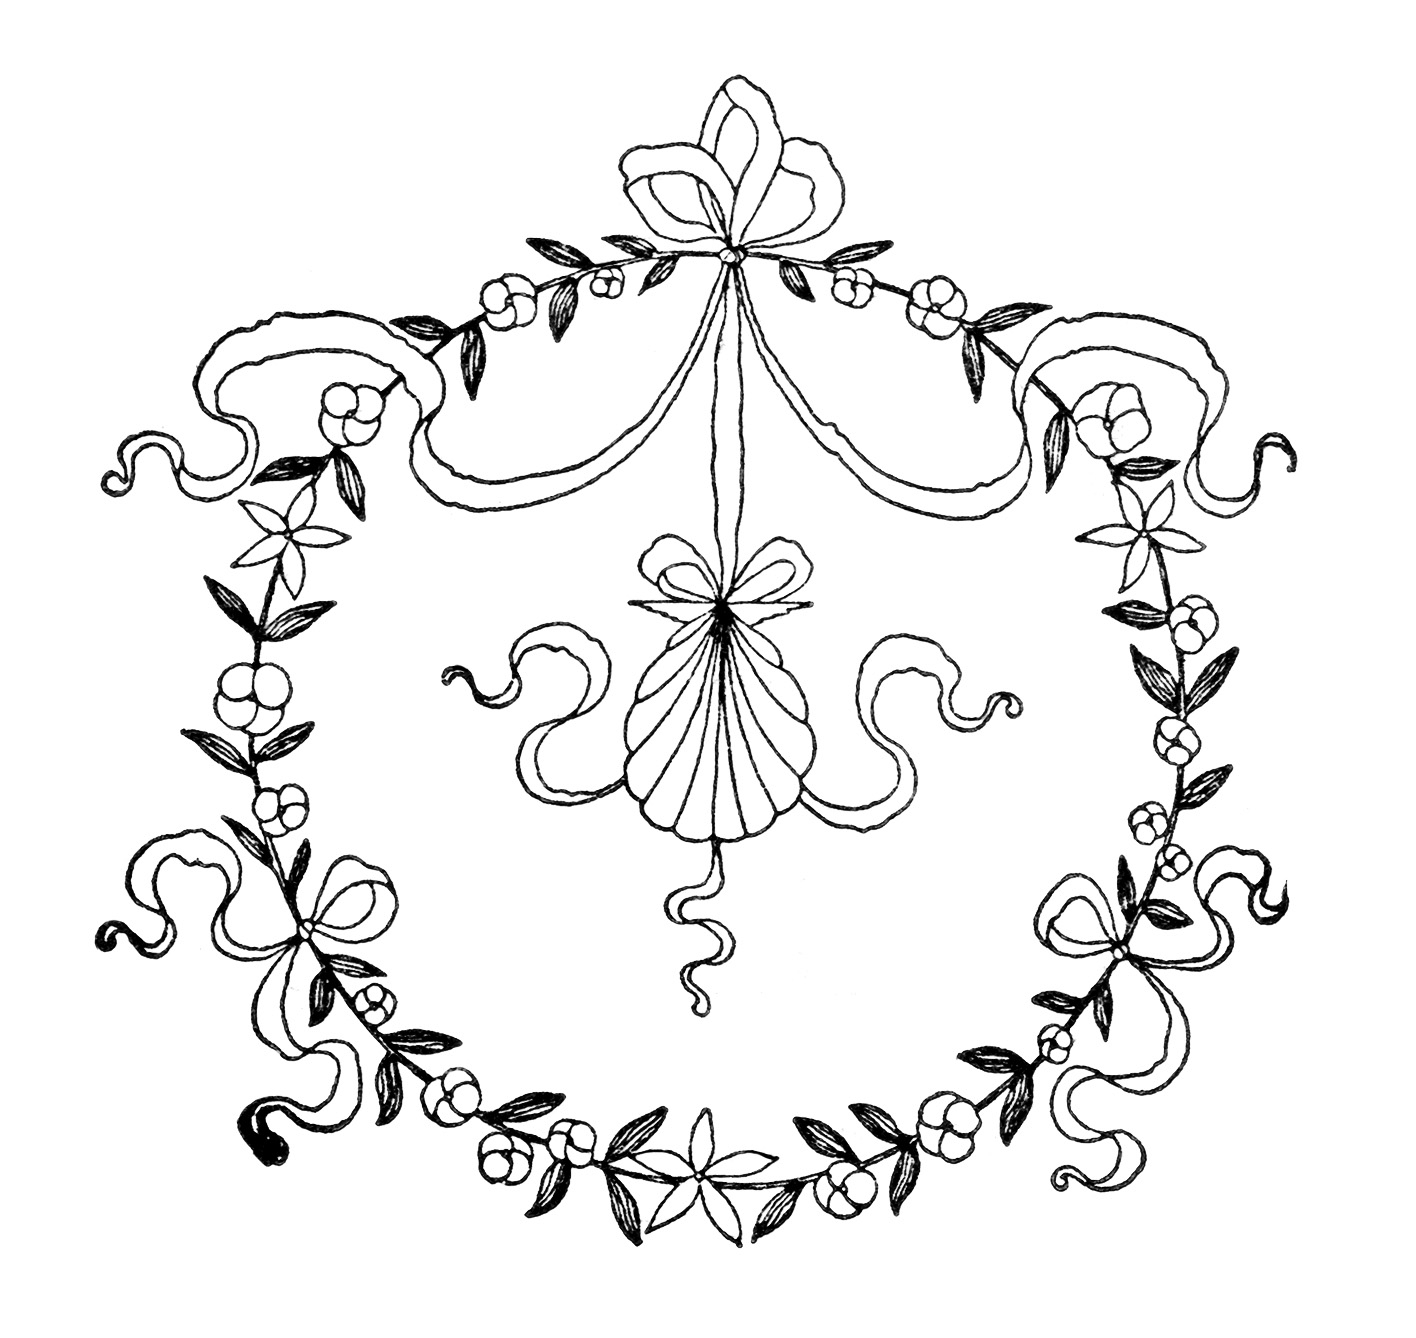 Antique Embroidery Patterns Free Clipart Vintage Embroidery Designs Old Design Shop Blog